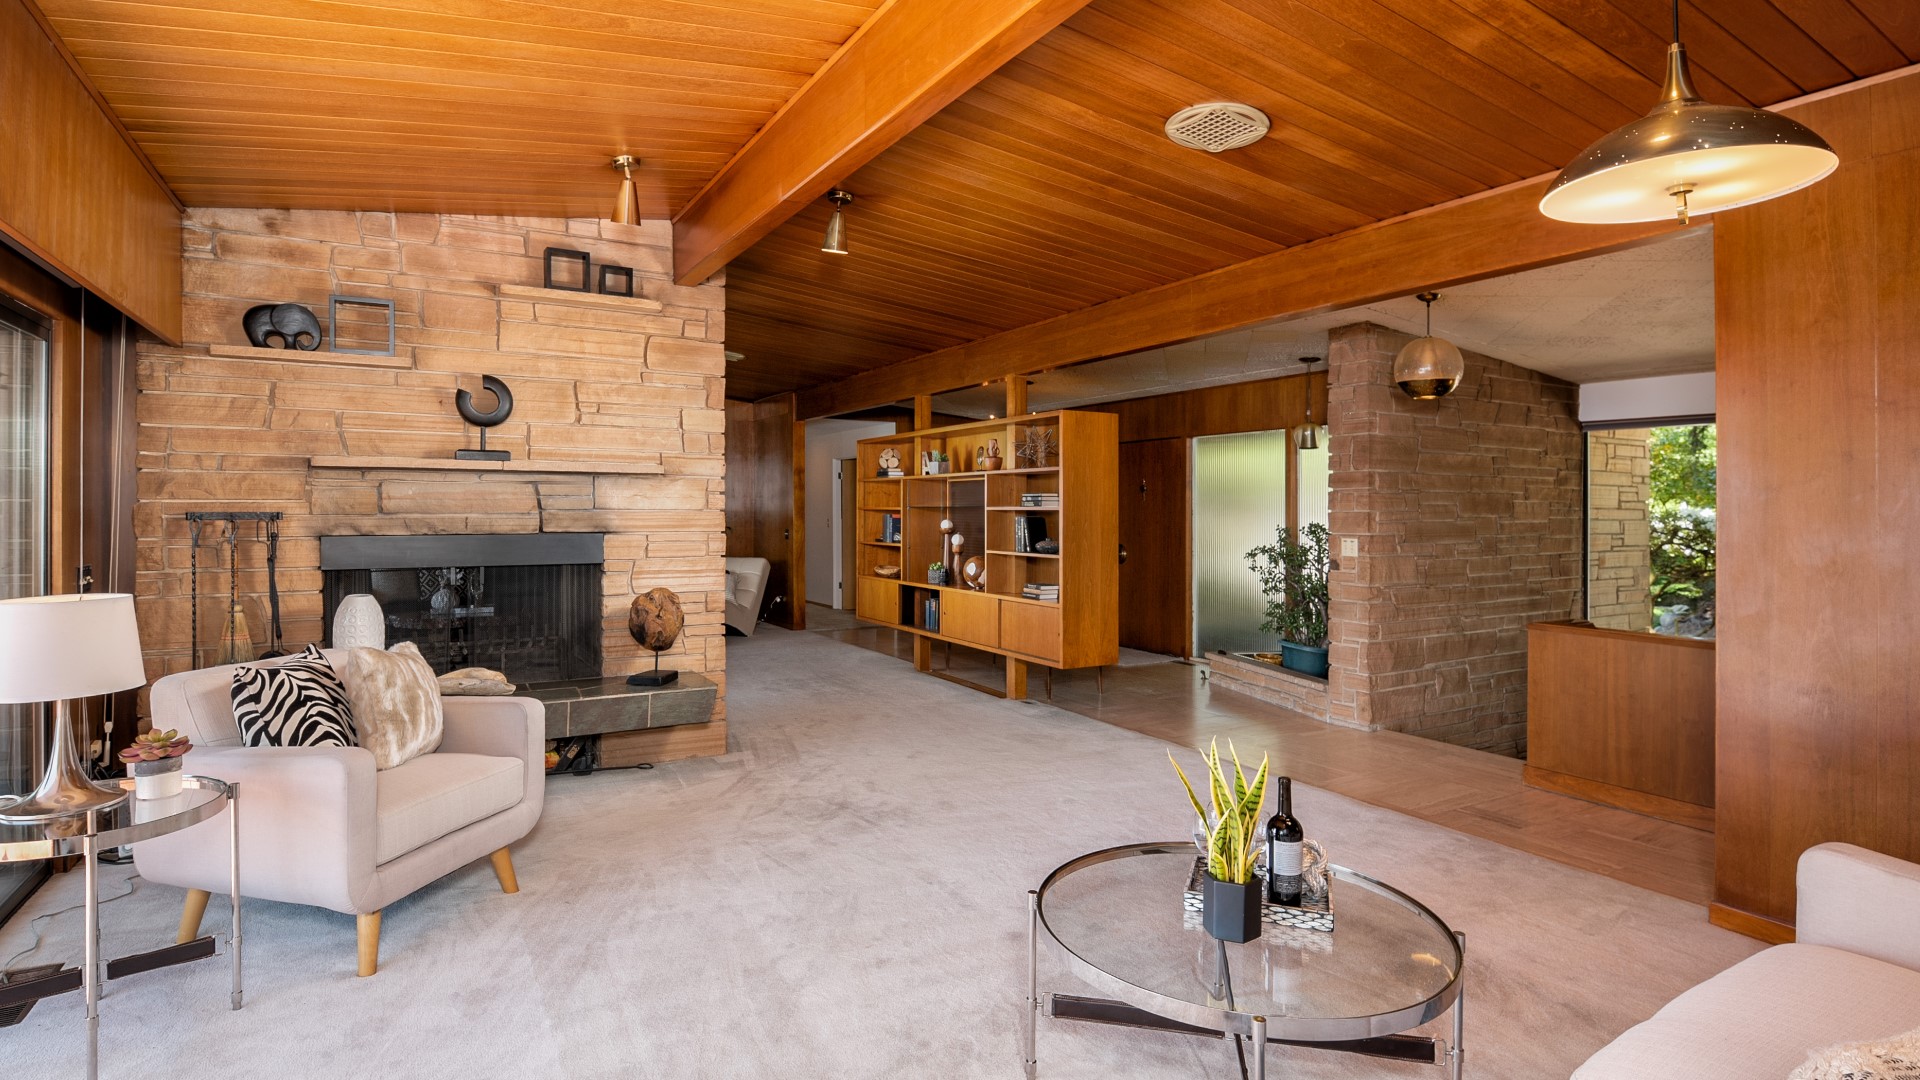 The Midcentury Modern Classic has been virtually untouched since 1954